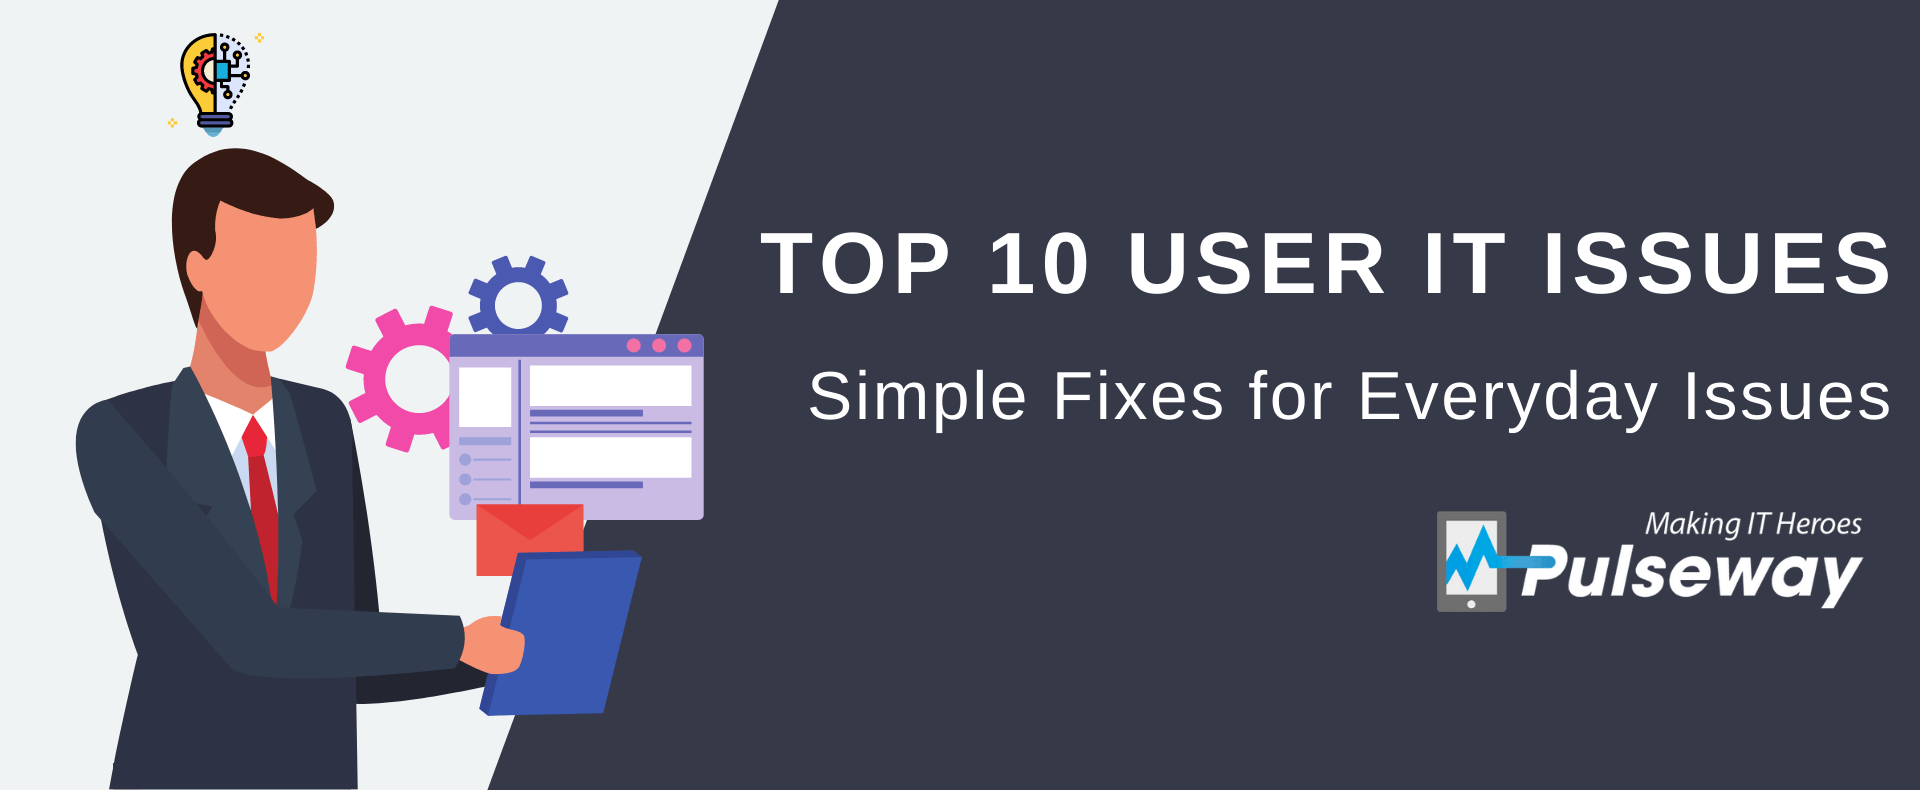 Top 10 User IT Issues: Simple Fixes for Everyday Issues